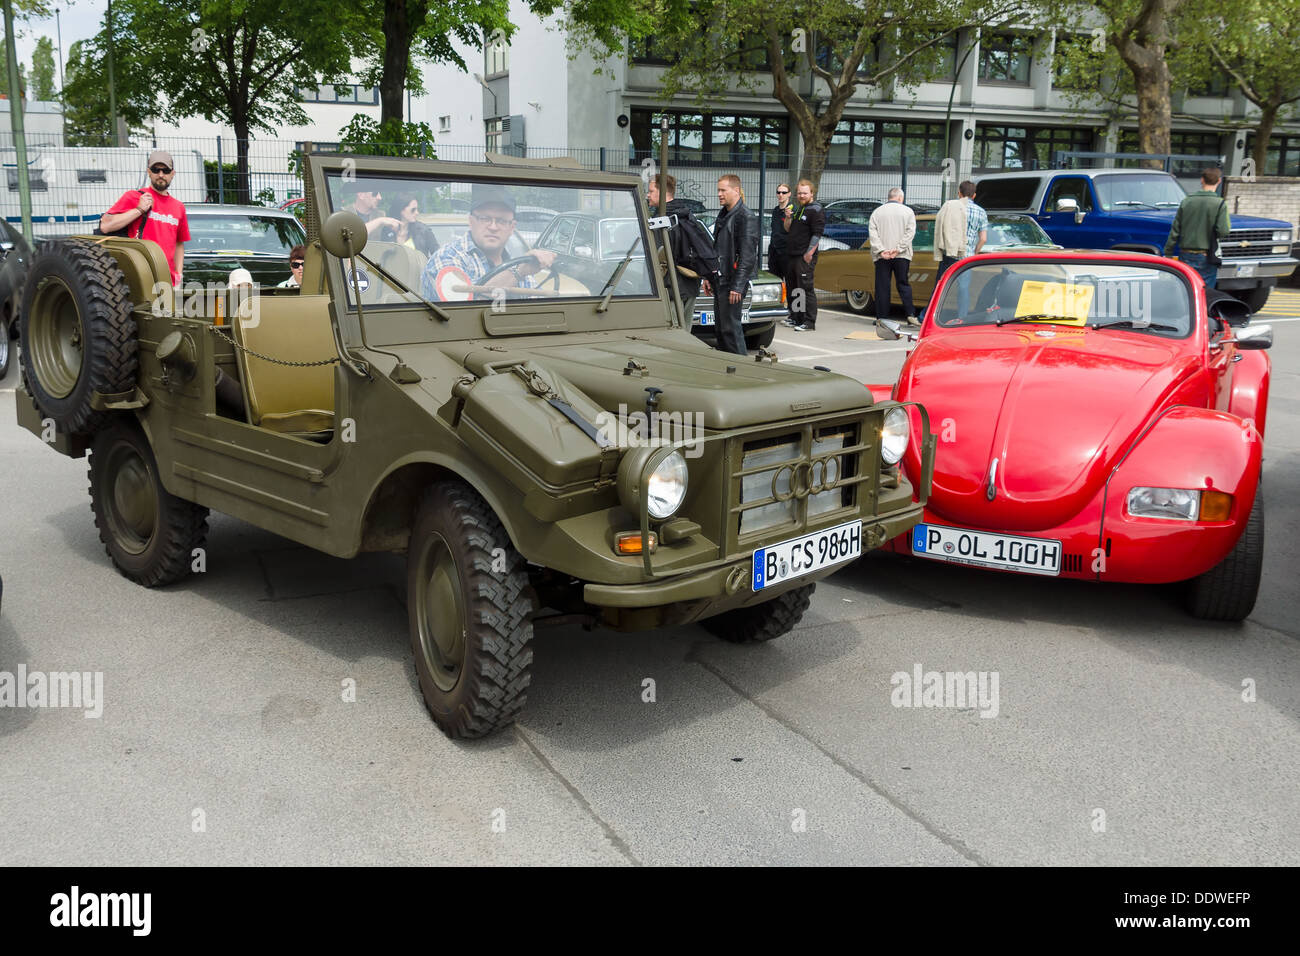 BERLIN - MAY 11: Military vehicle DKW Munga by Auto Union, 26th Oldtimer-Tage Berlin-Brandenburg, May 11, 2013 Berlin, Germany Stock Photo